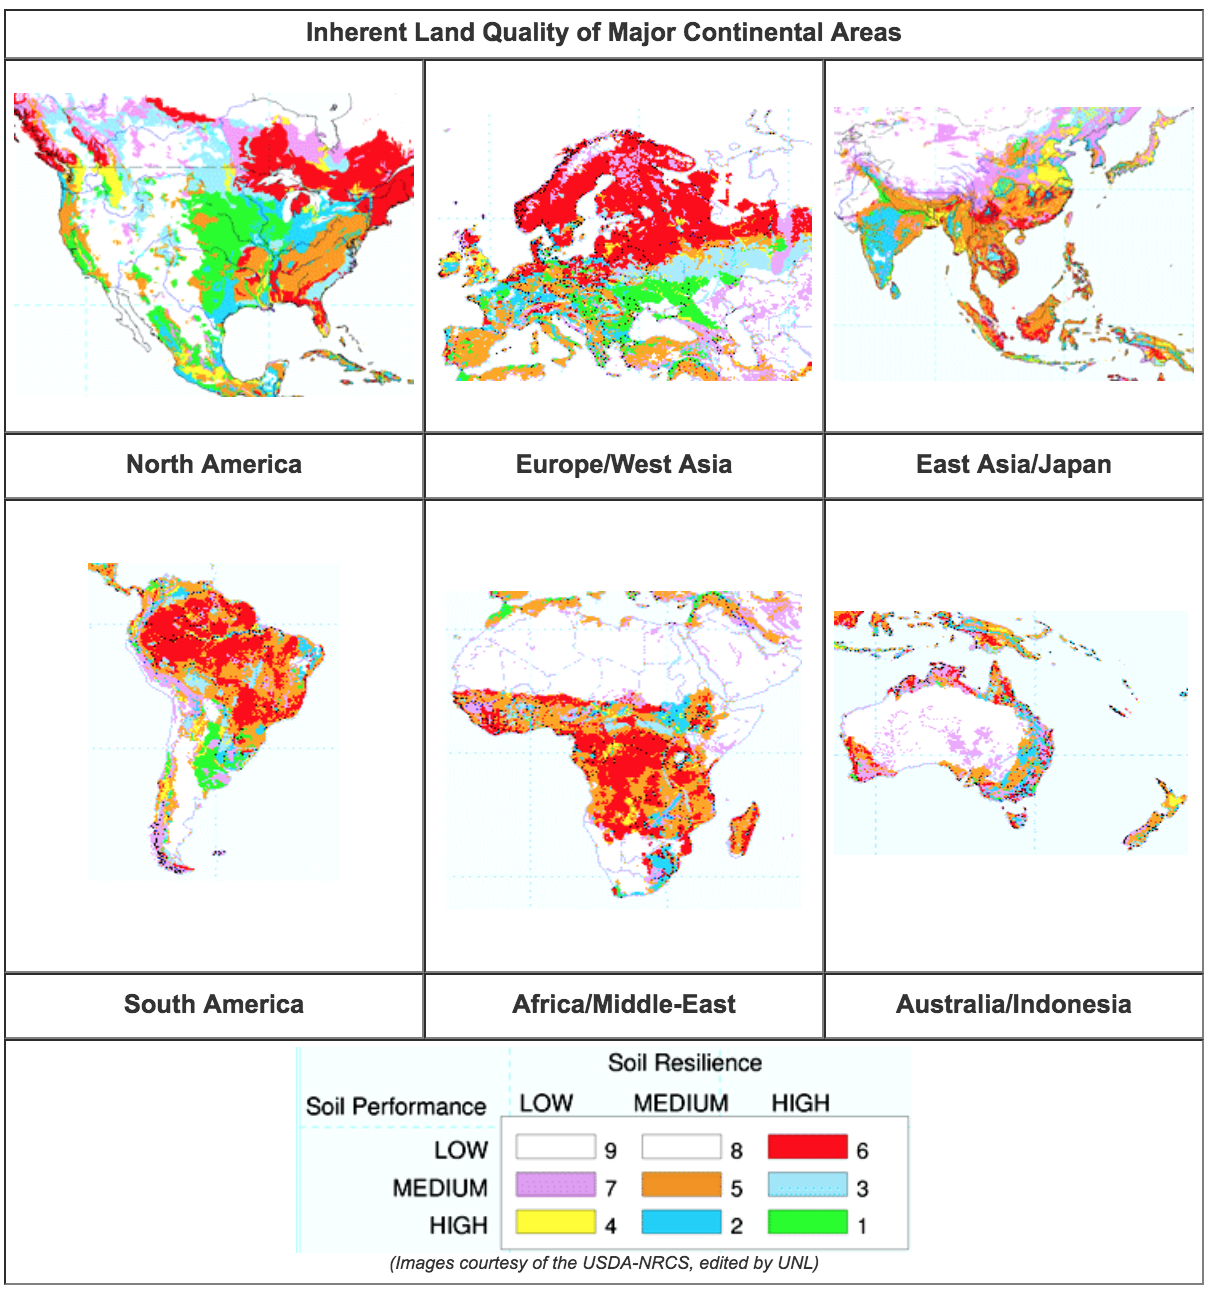 land quality assessment map by continent